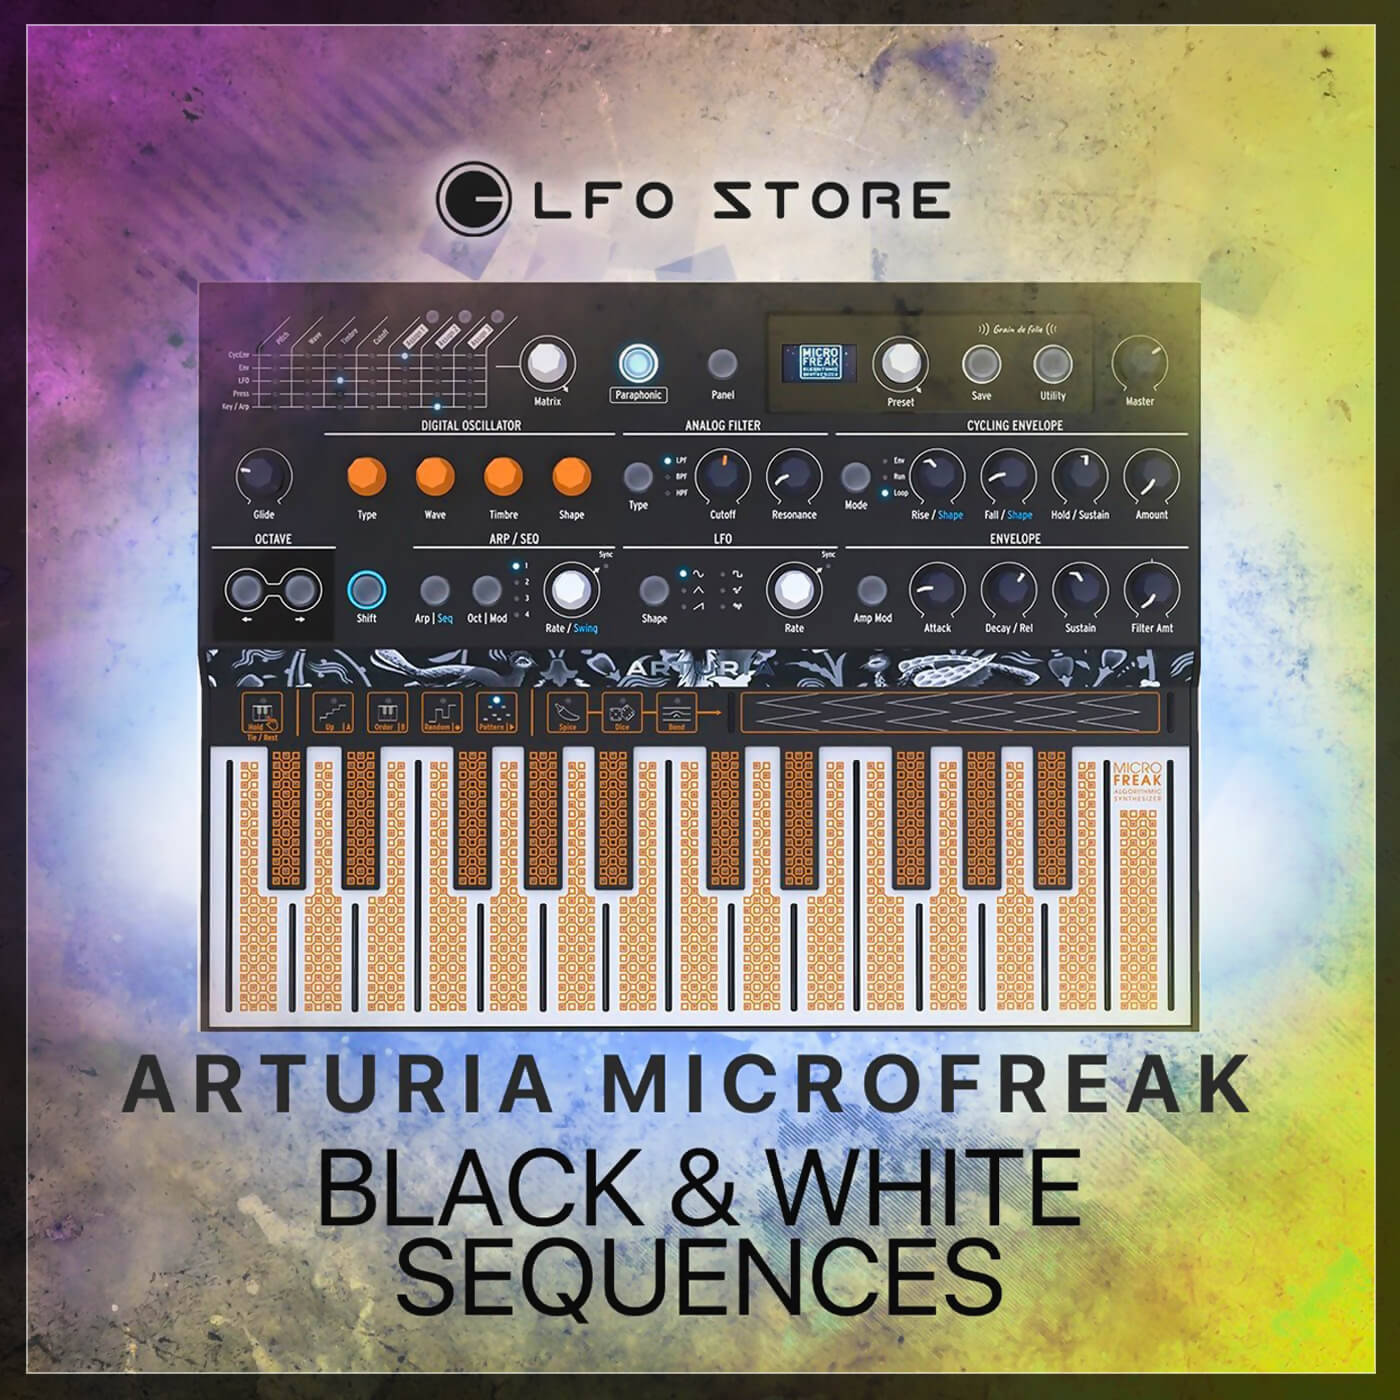 Arturia Microfreak preset pack and patch bank. 50 presets for Arturias Microfreak synthesizer